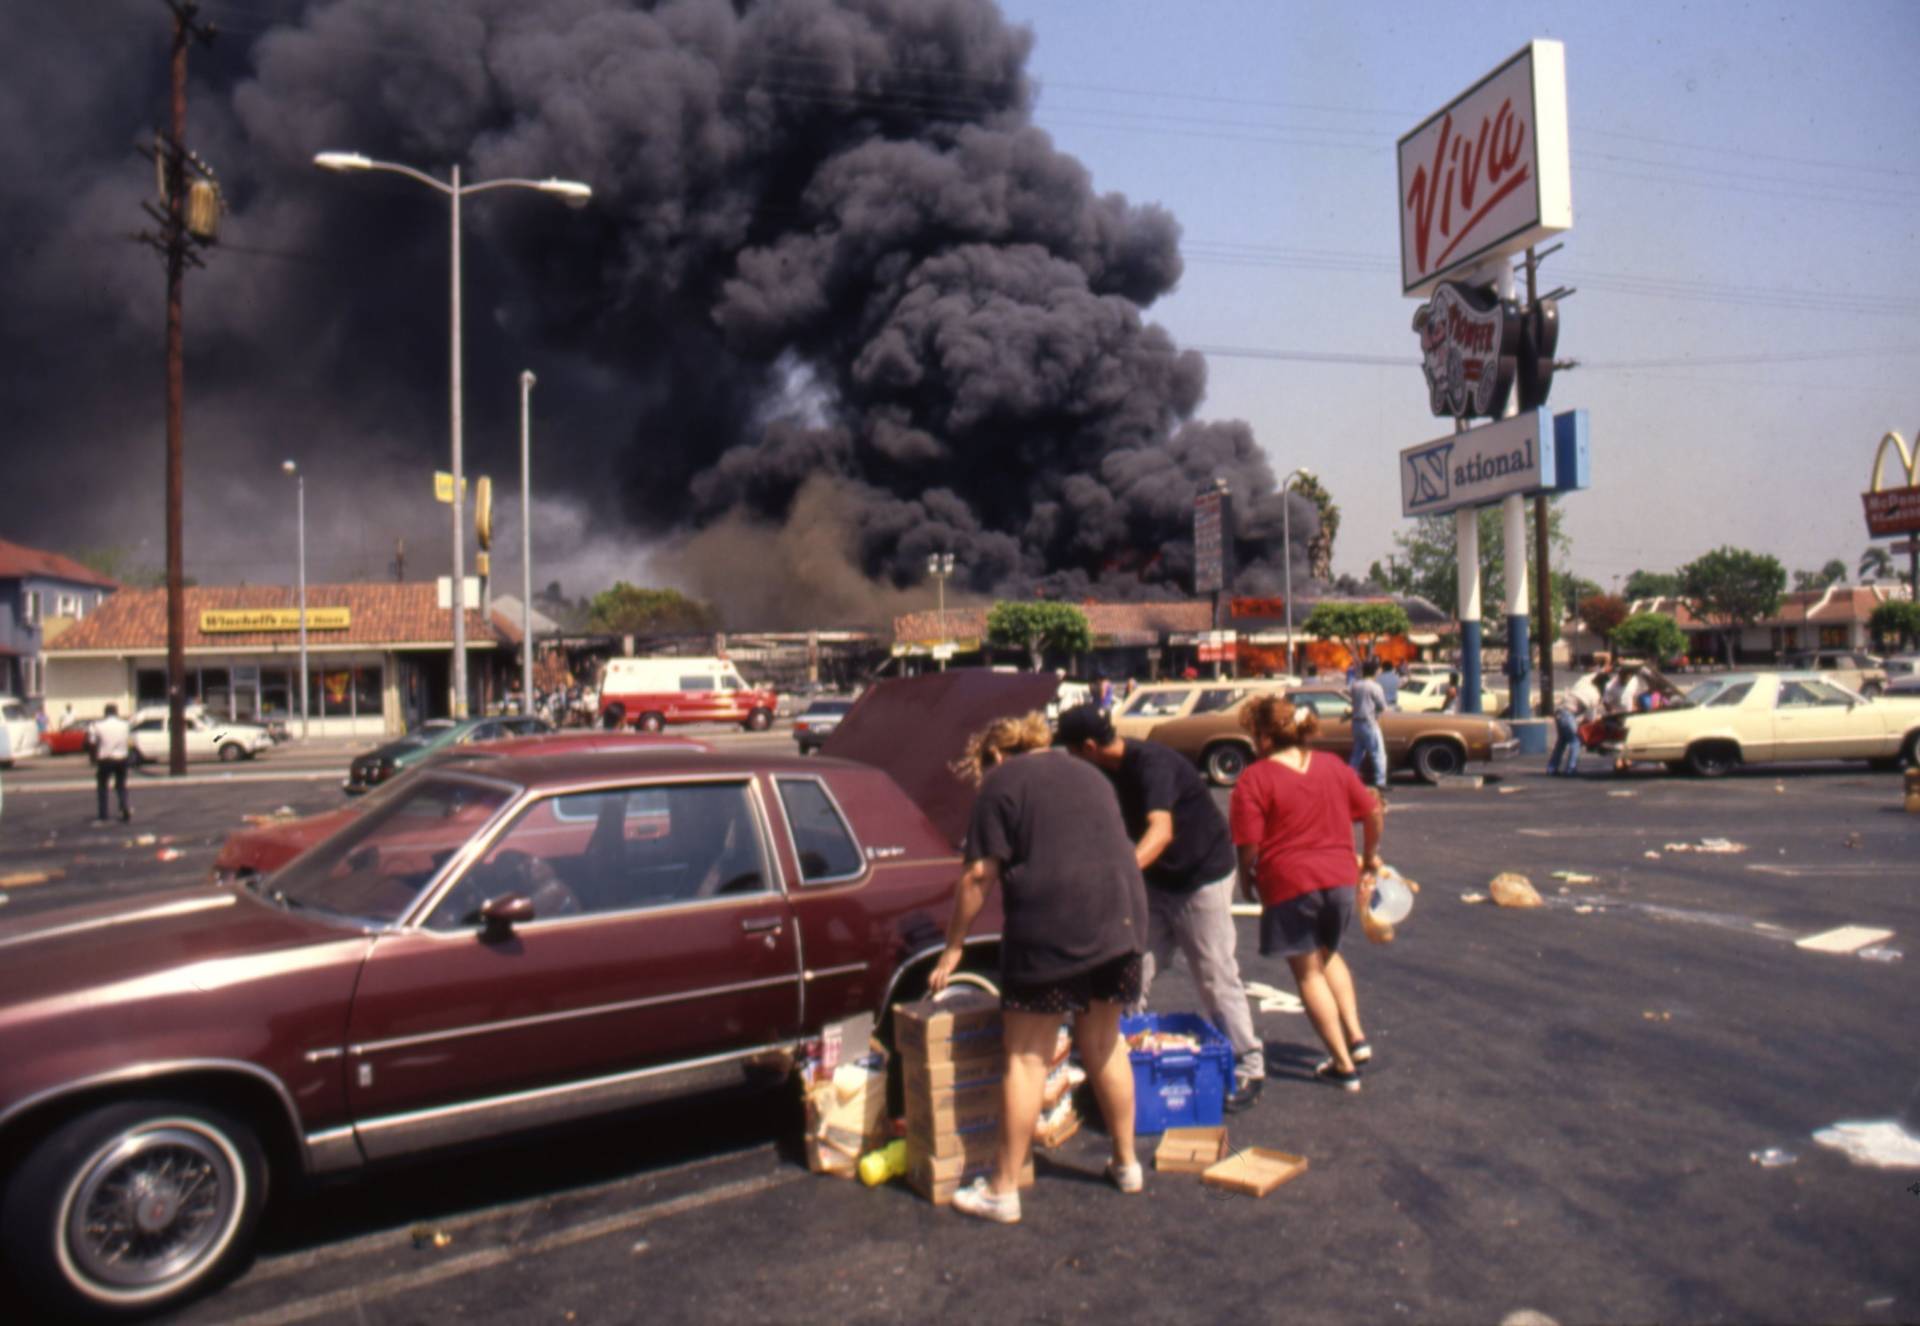 Looters load up a car at the Viva shopping center near a billowing fire during the rioting that erupted in Los Angeles on April 29, 1992, after a jury found four Los Angeles Police Department officers not guilty in the beating of Rodney King. Ron Eisenbeg/Michael Ochs Archives/Getty Images